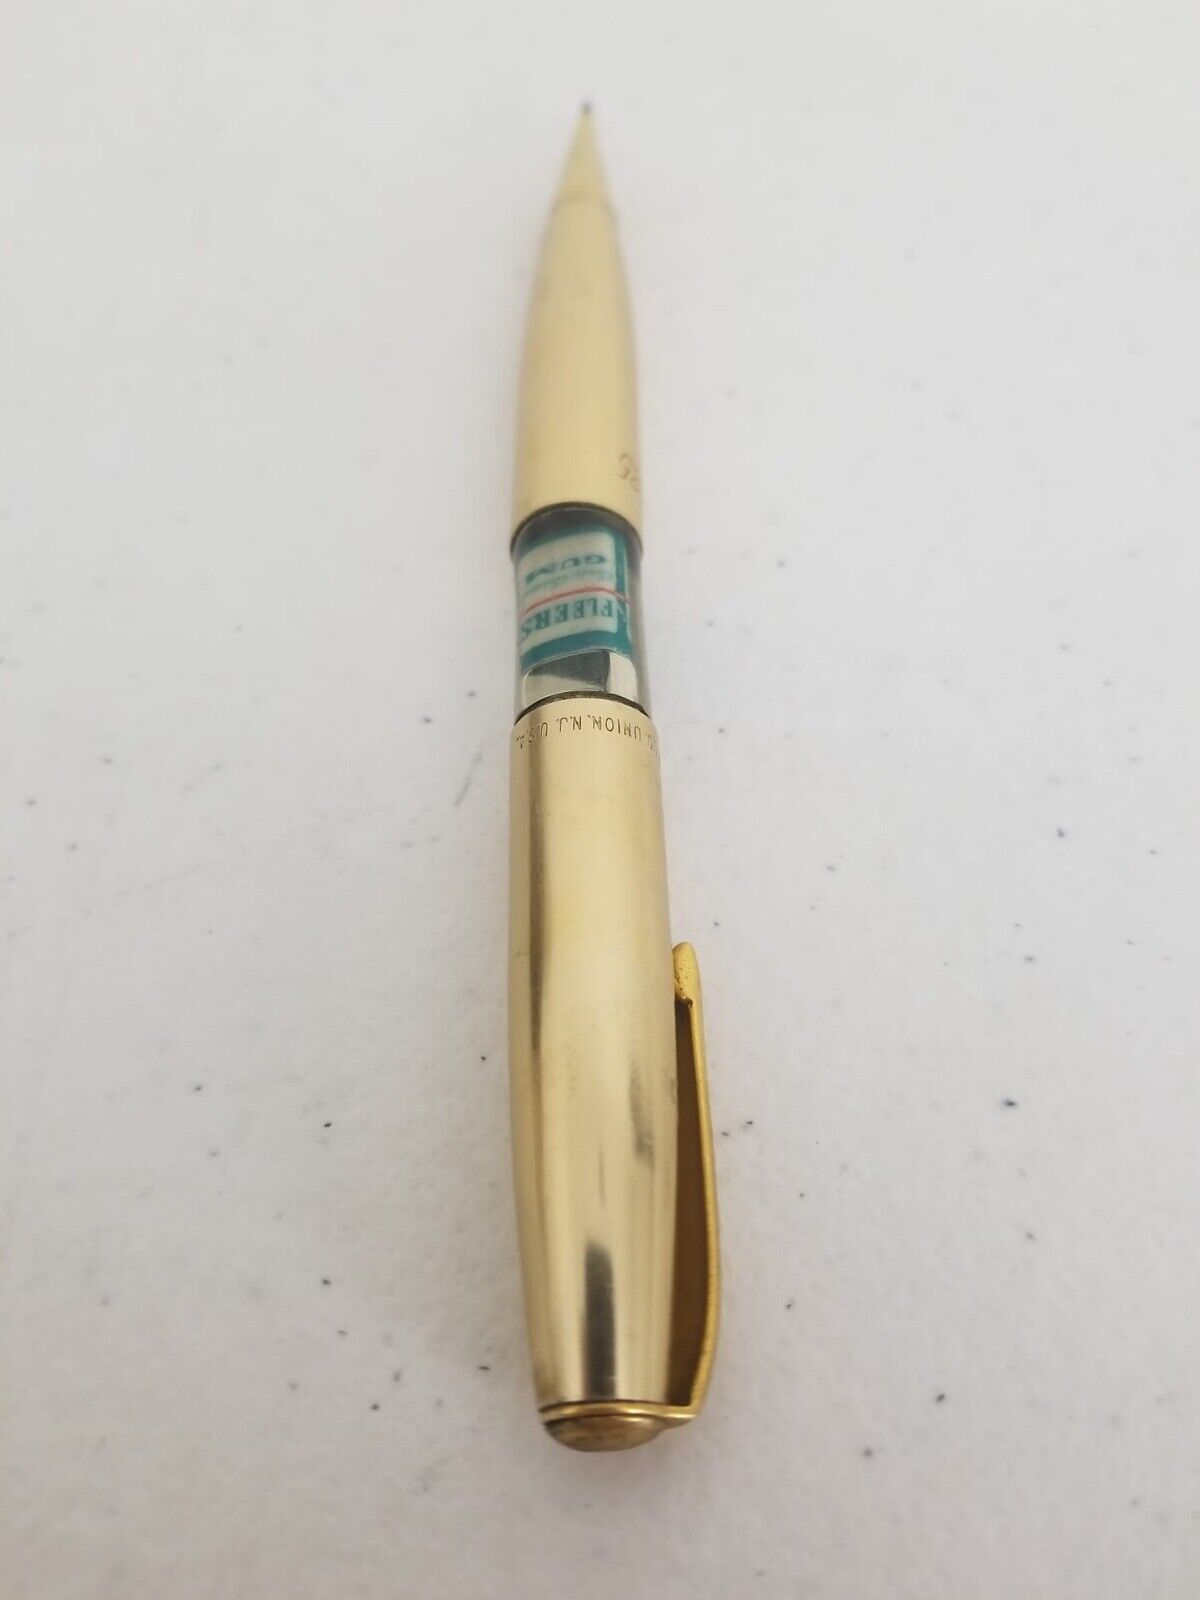 Rare Vintage Fleers Gum Advertising Floaty Pen - Mechanical Pencil - Ideal for Collectors and Office Enthusiasts - TreasuTiques